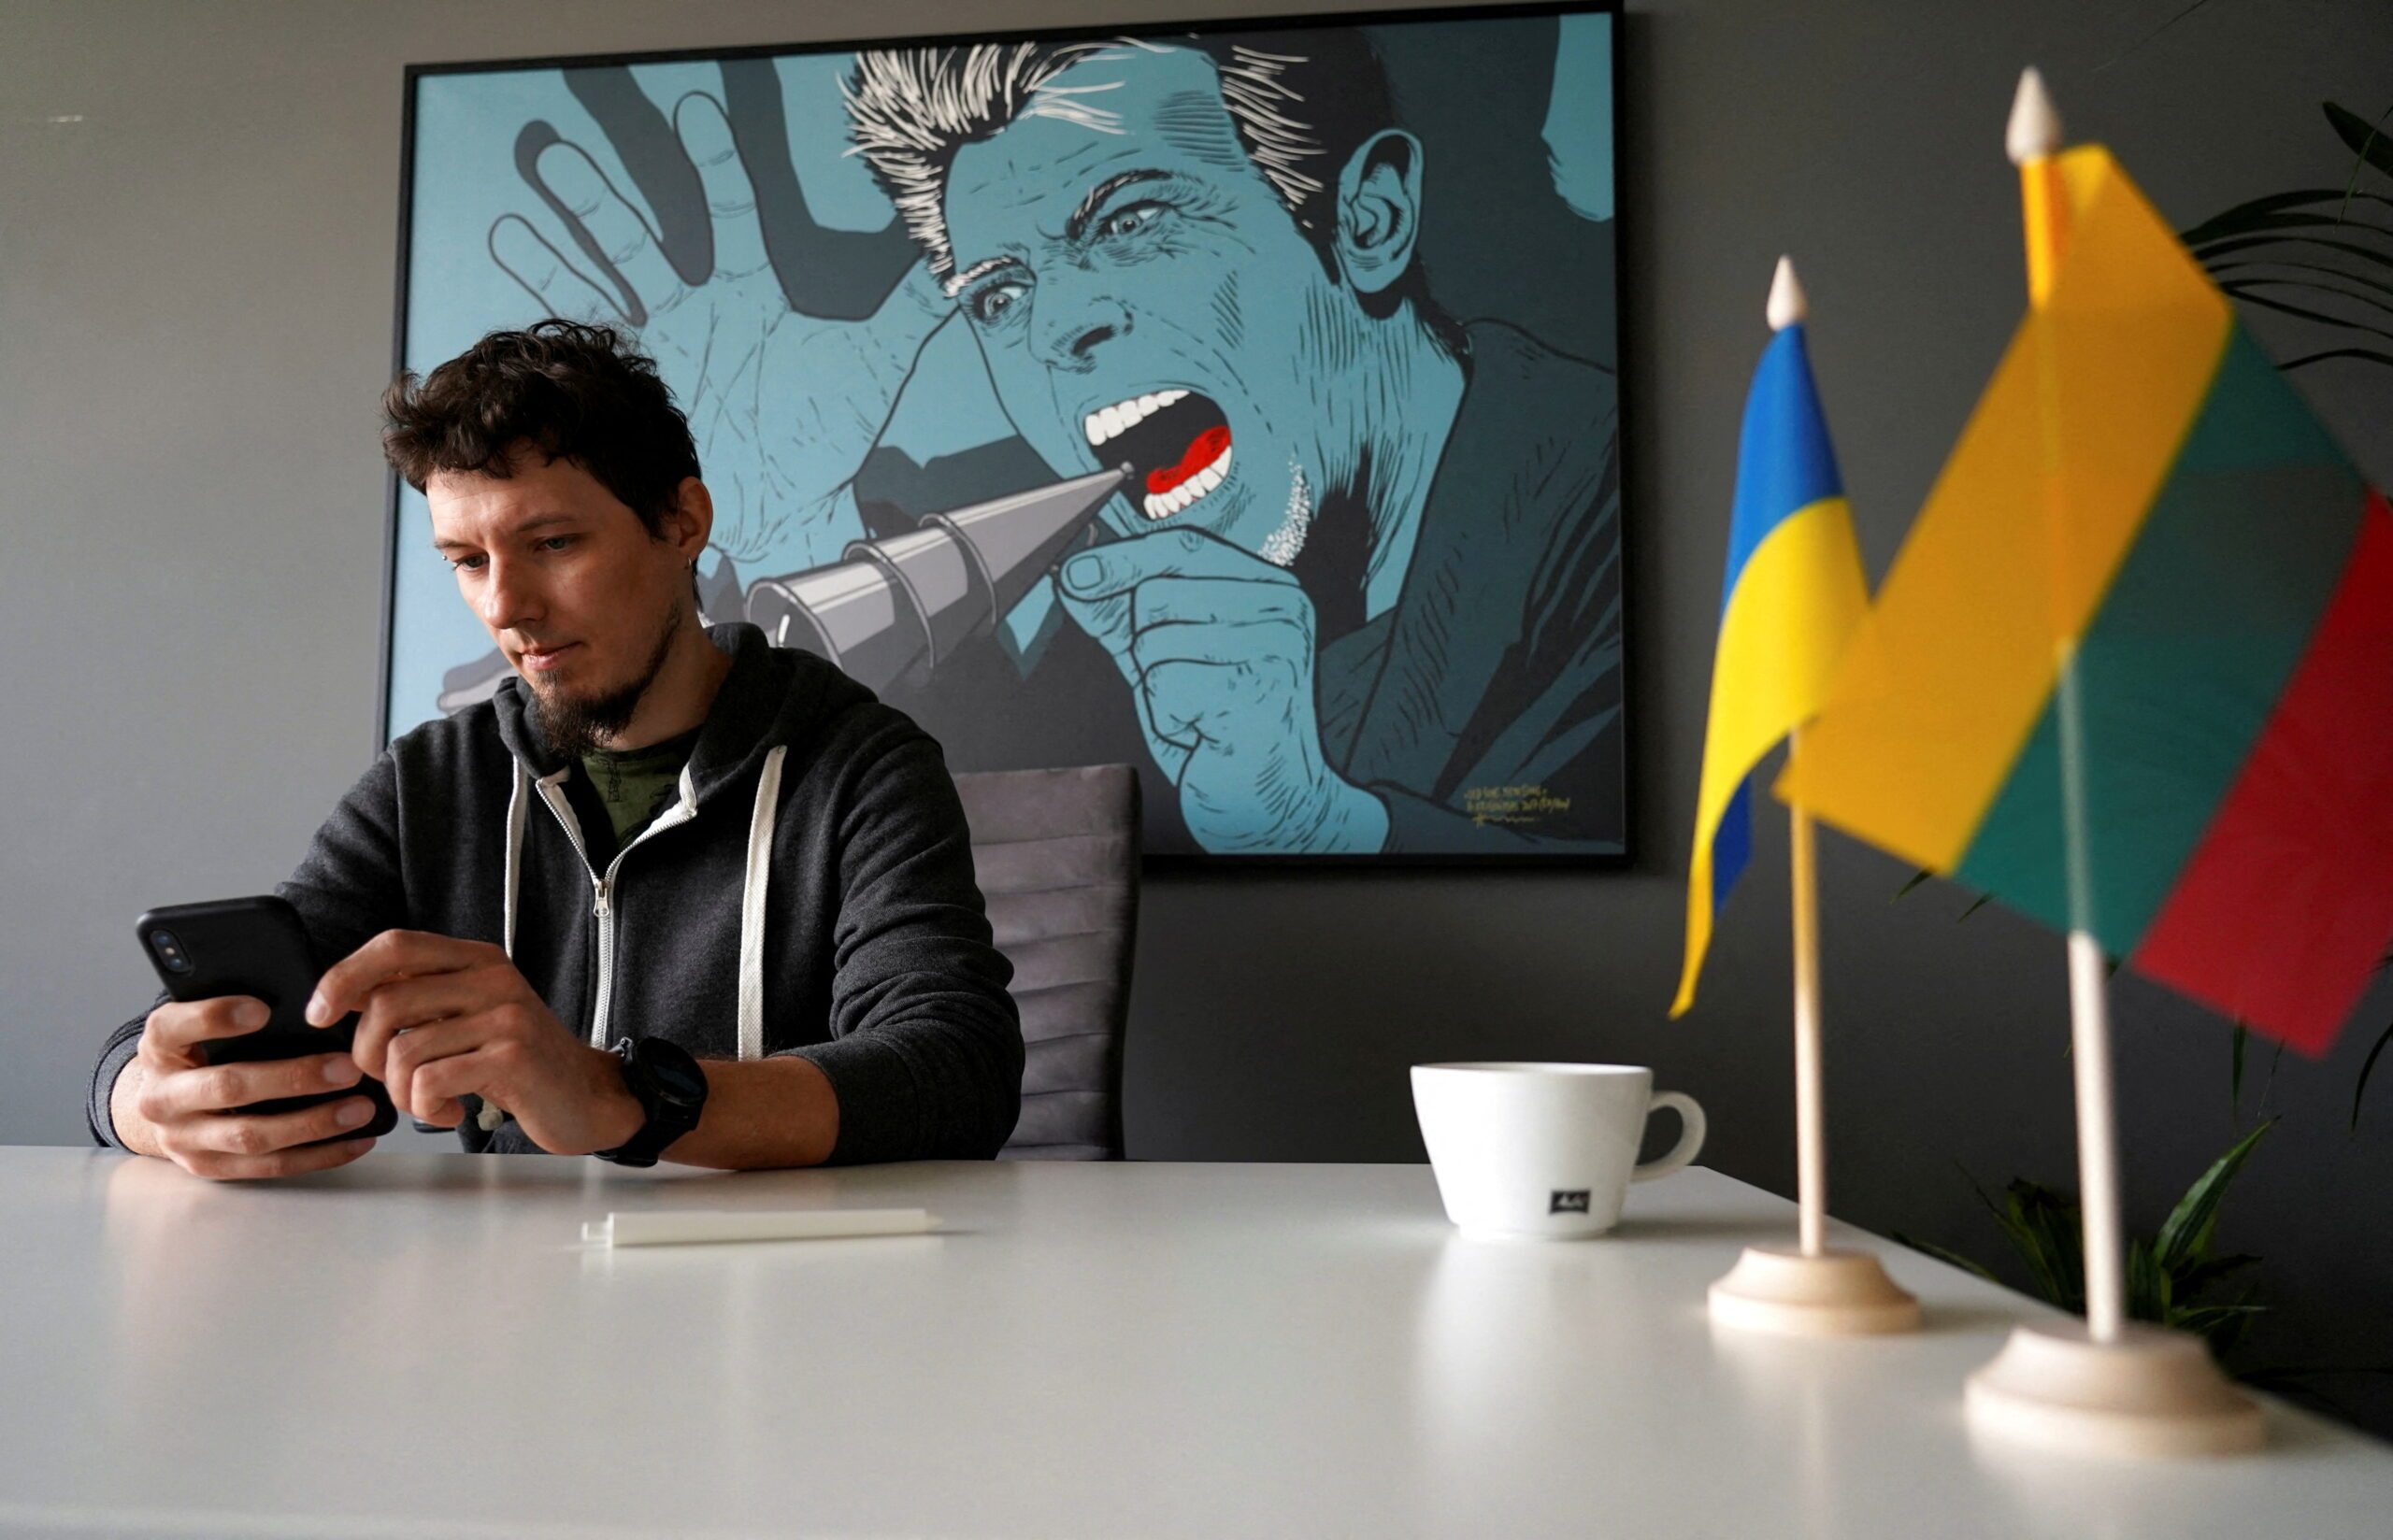 Lithuania project fights Kremlin view of Ukraine conflict one phone call at a time